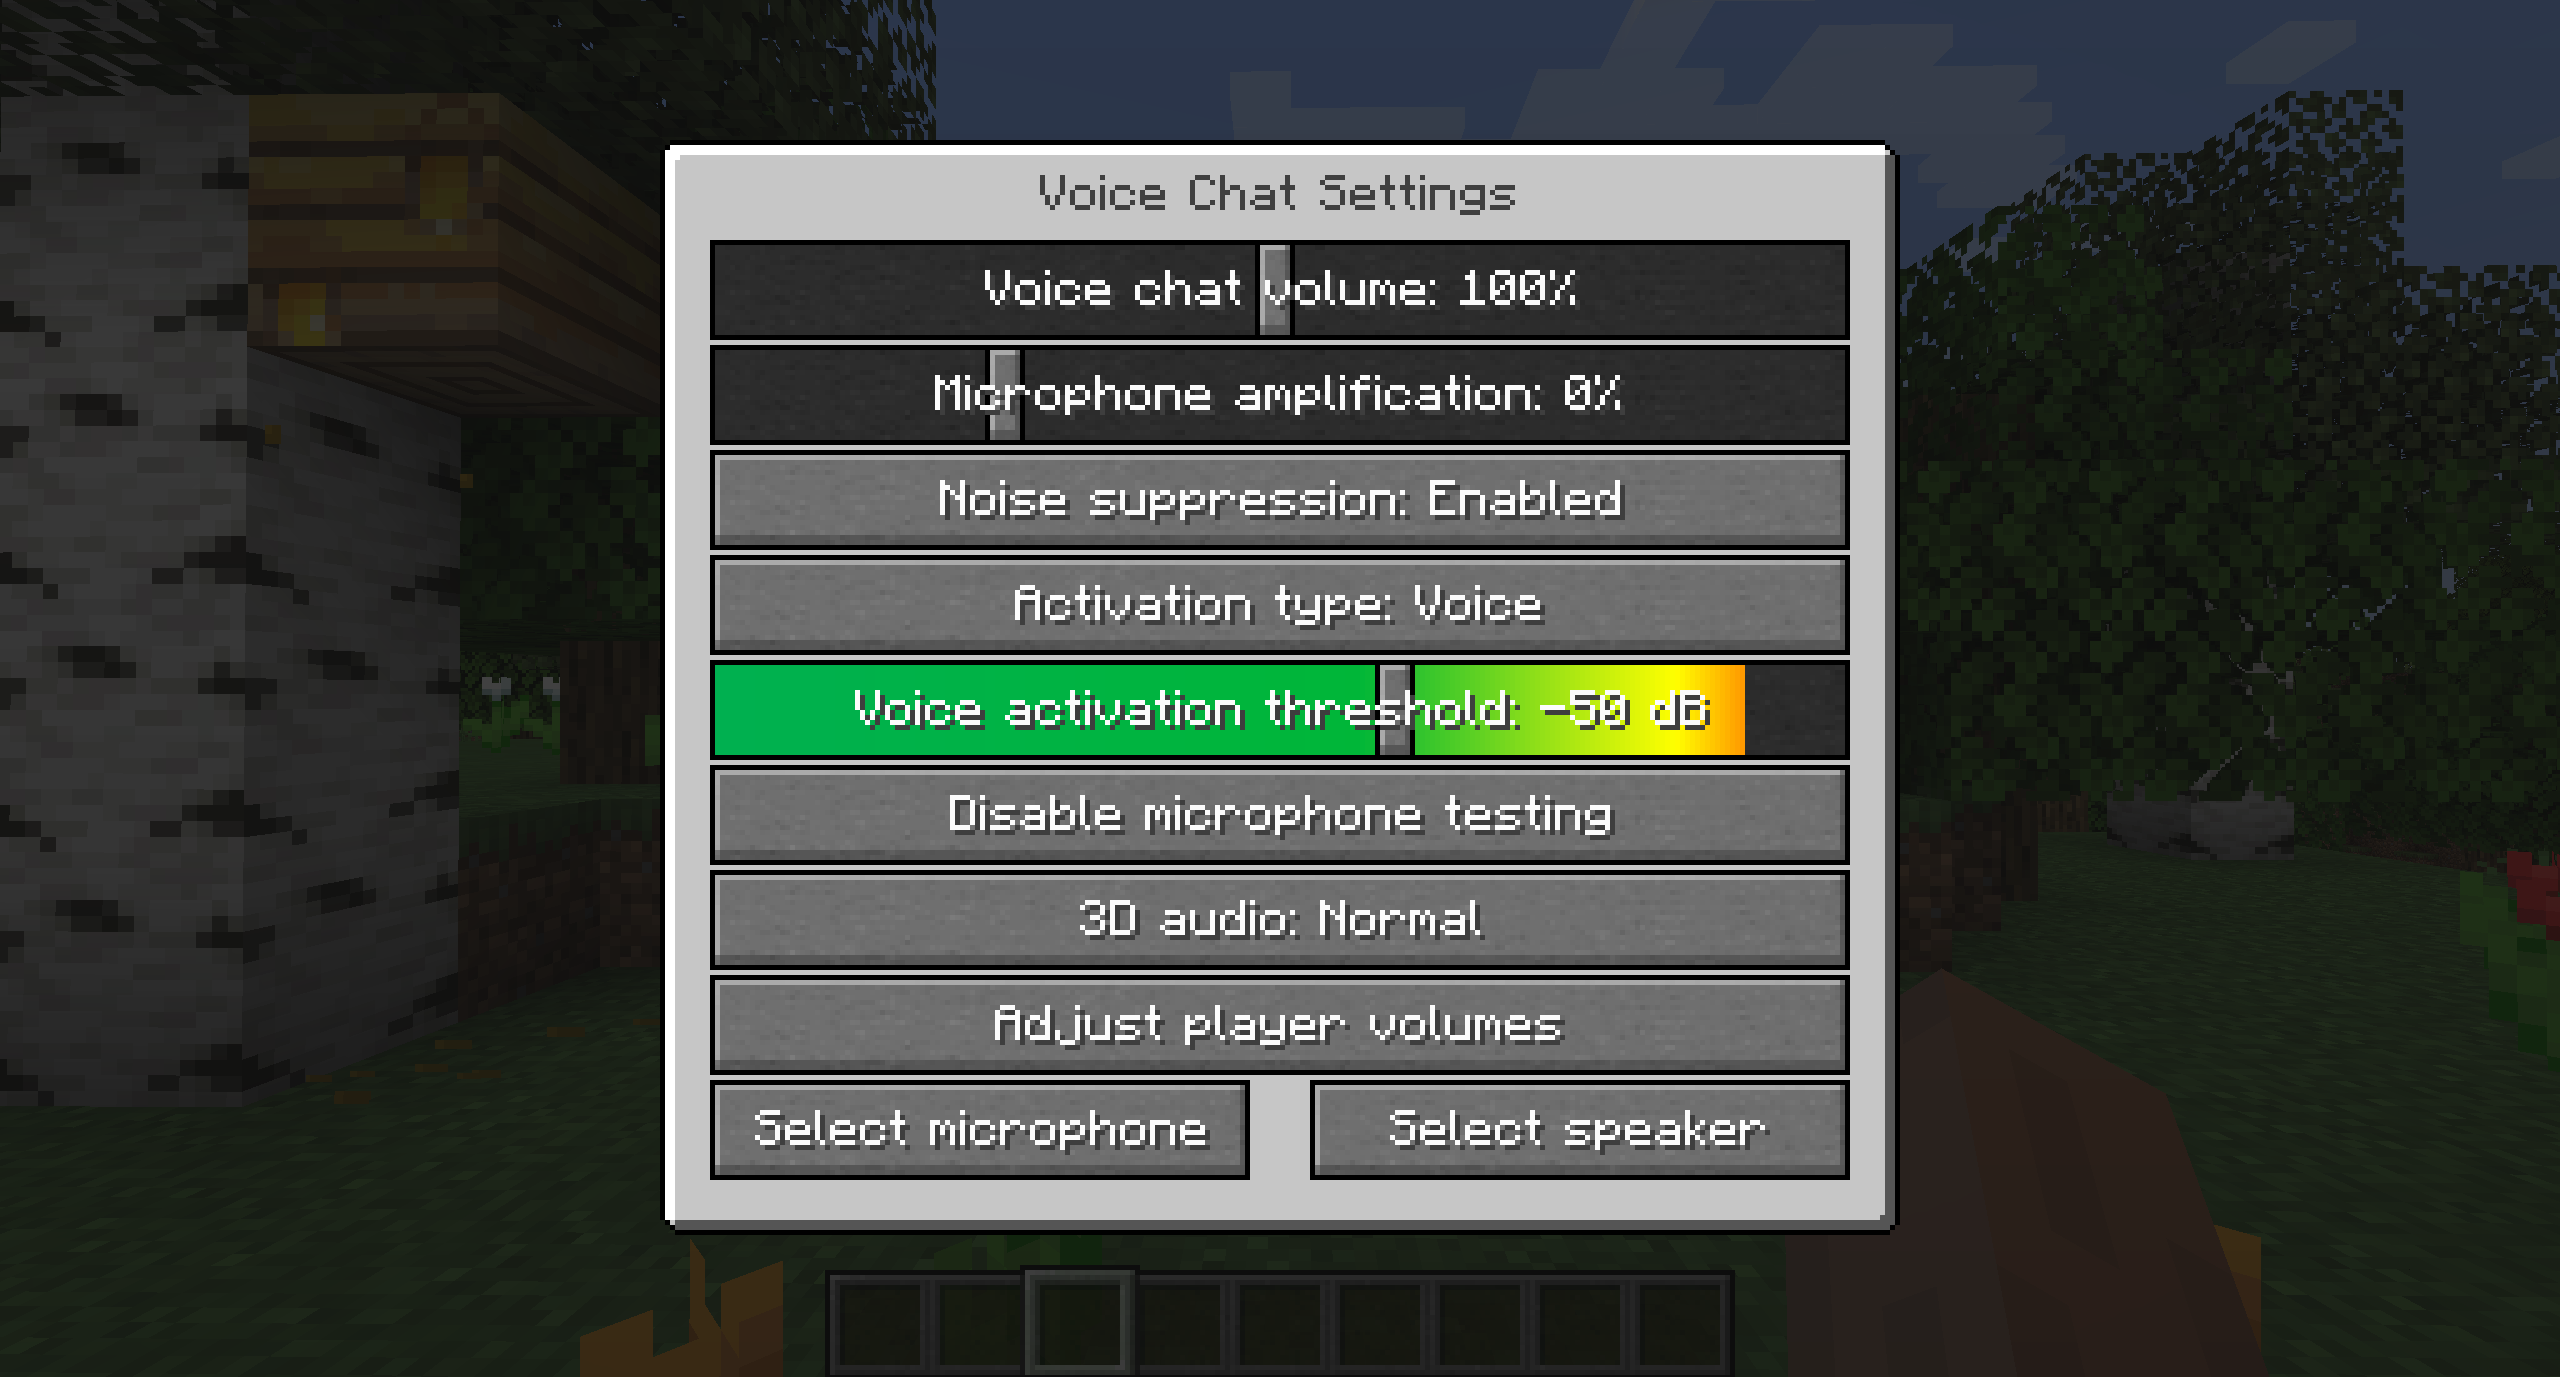 Voice chat settings